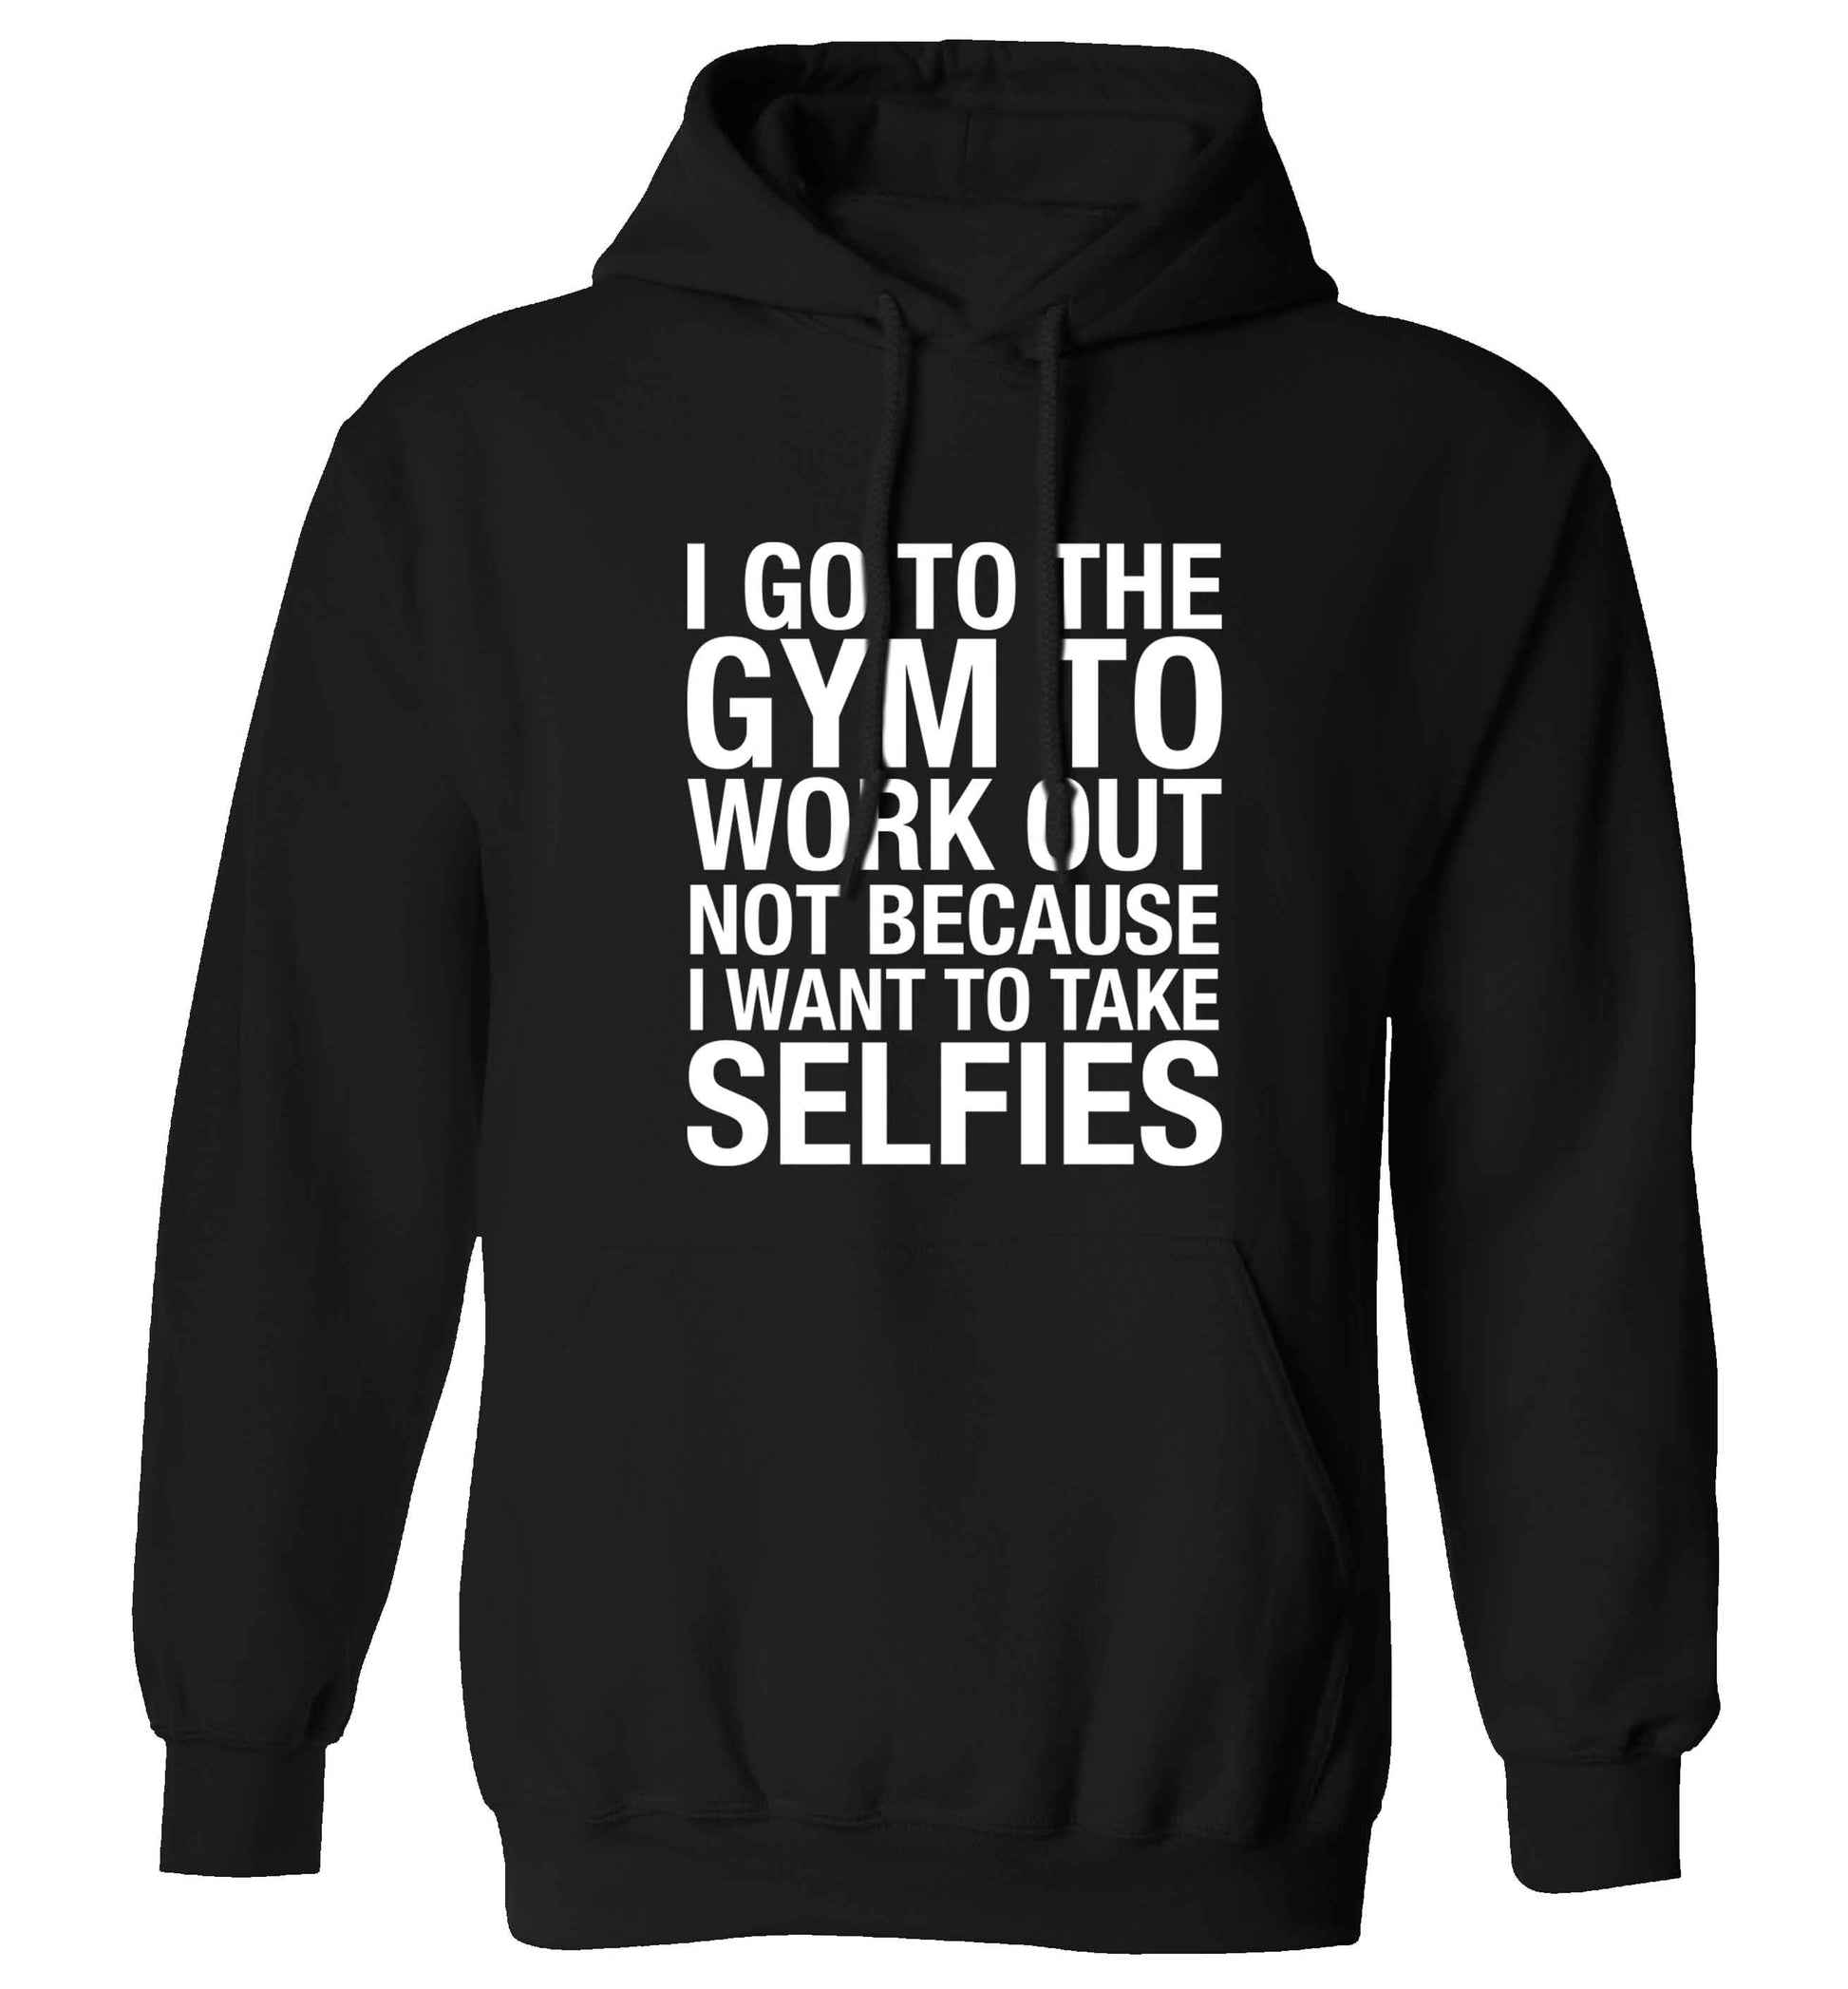 I go to the gym to workout not to take selfies adults unisex black hoodie 2XL